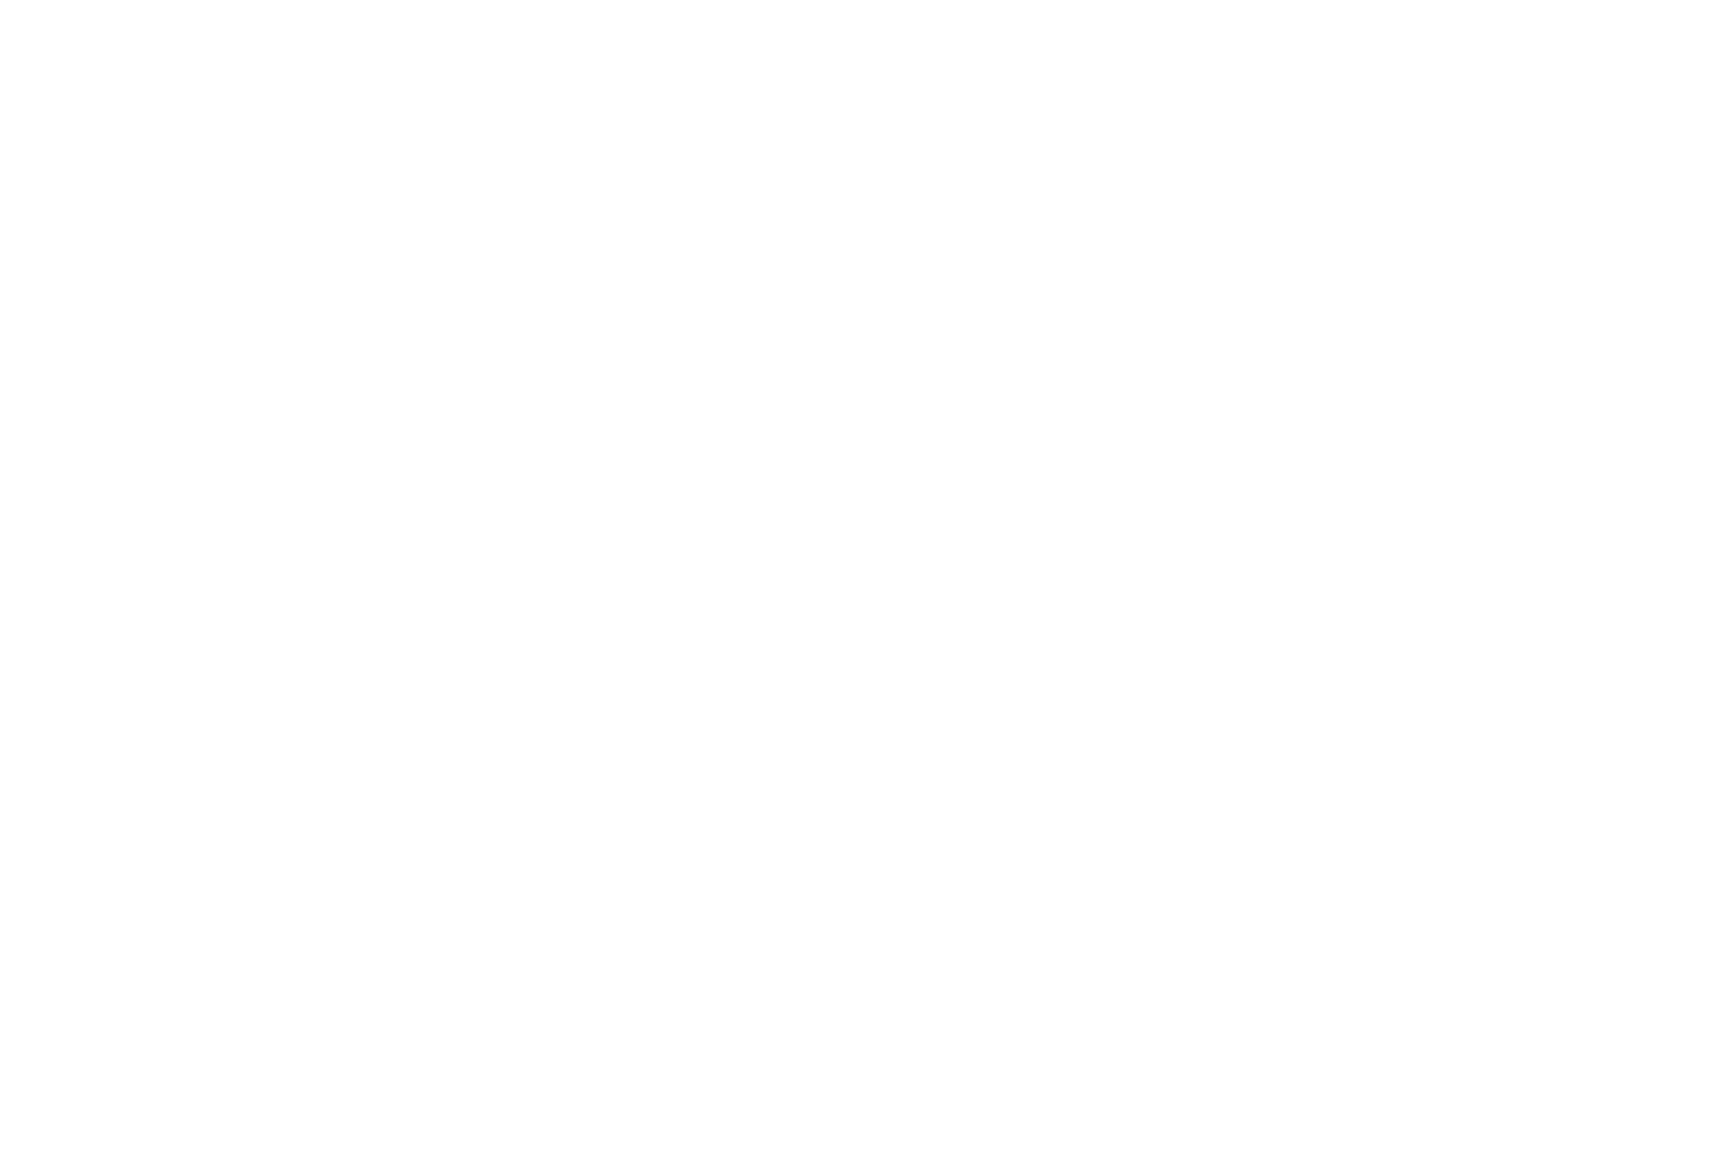 NOMINATED - BEST CINEMATOGRAPHY - THE MONKEY BREAD TREE AWARDS 2016 (1).png